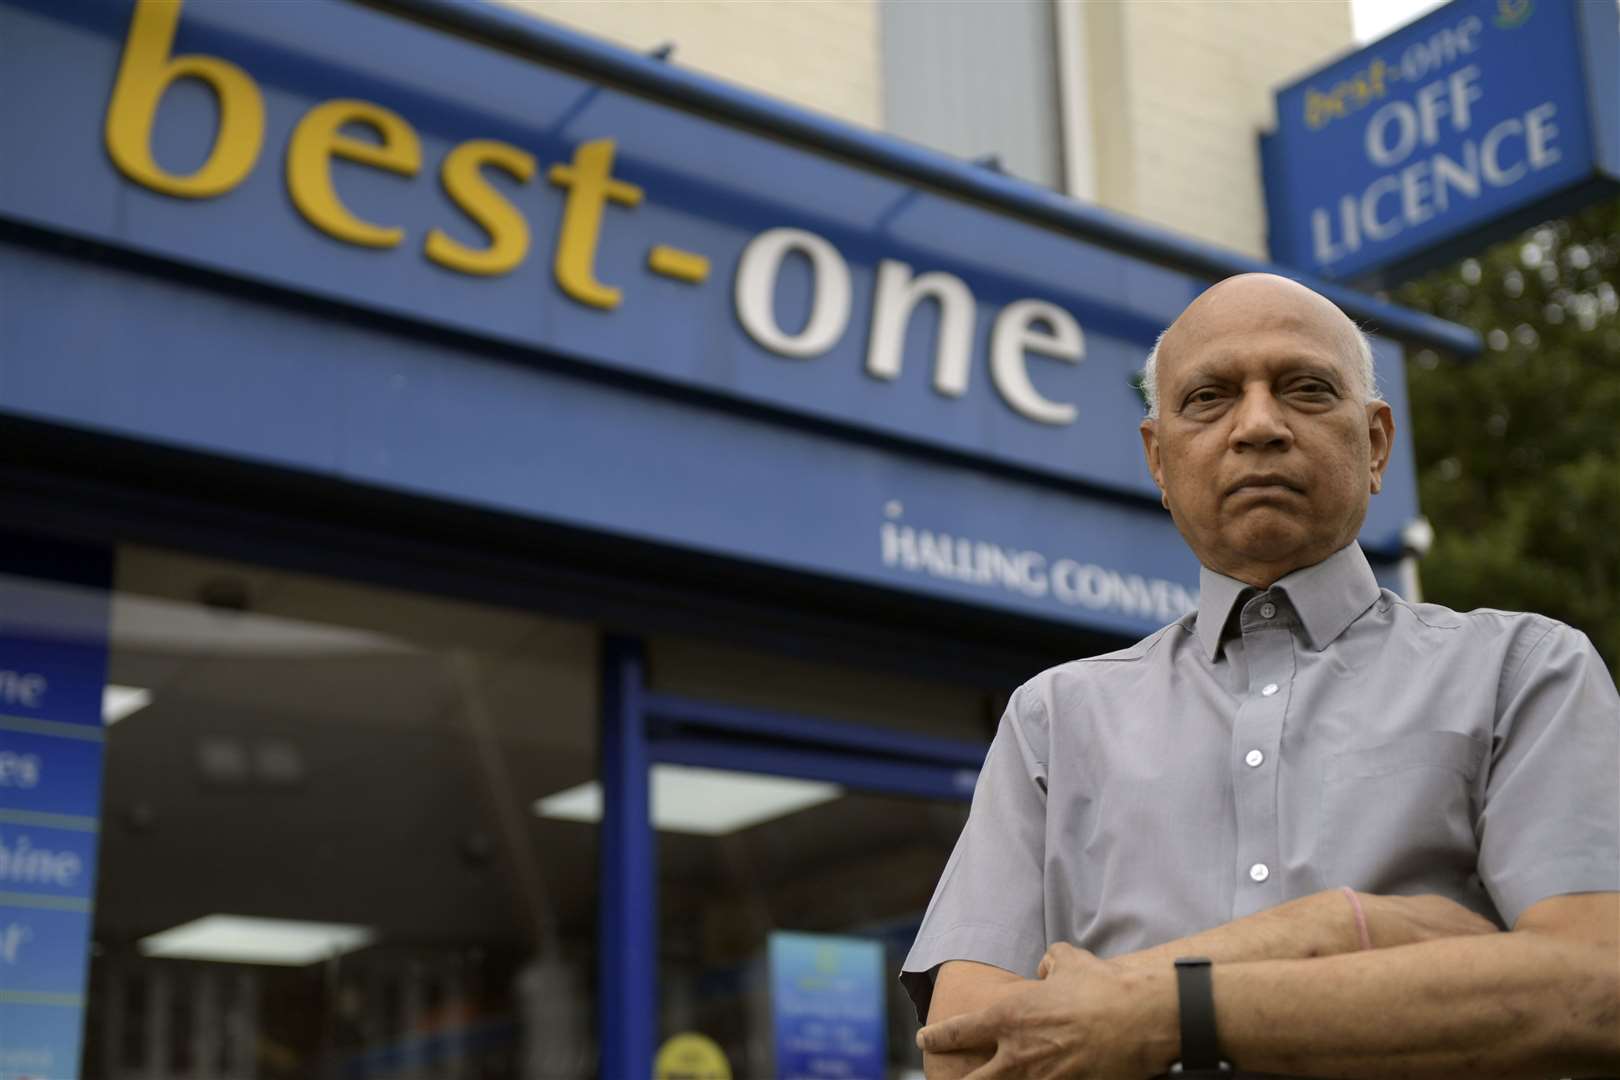 Vinay Patel outside his shop, Best One off licence